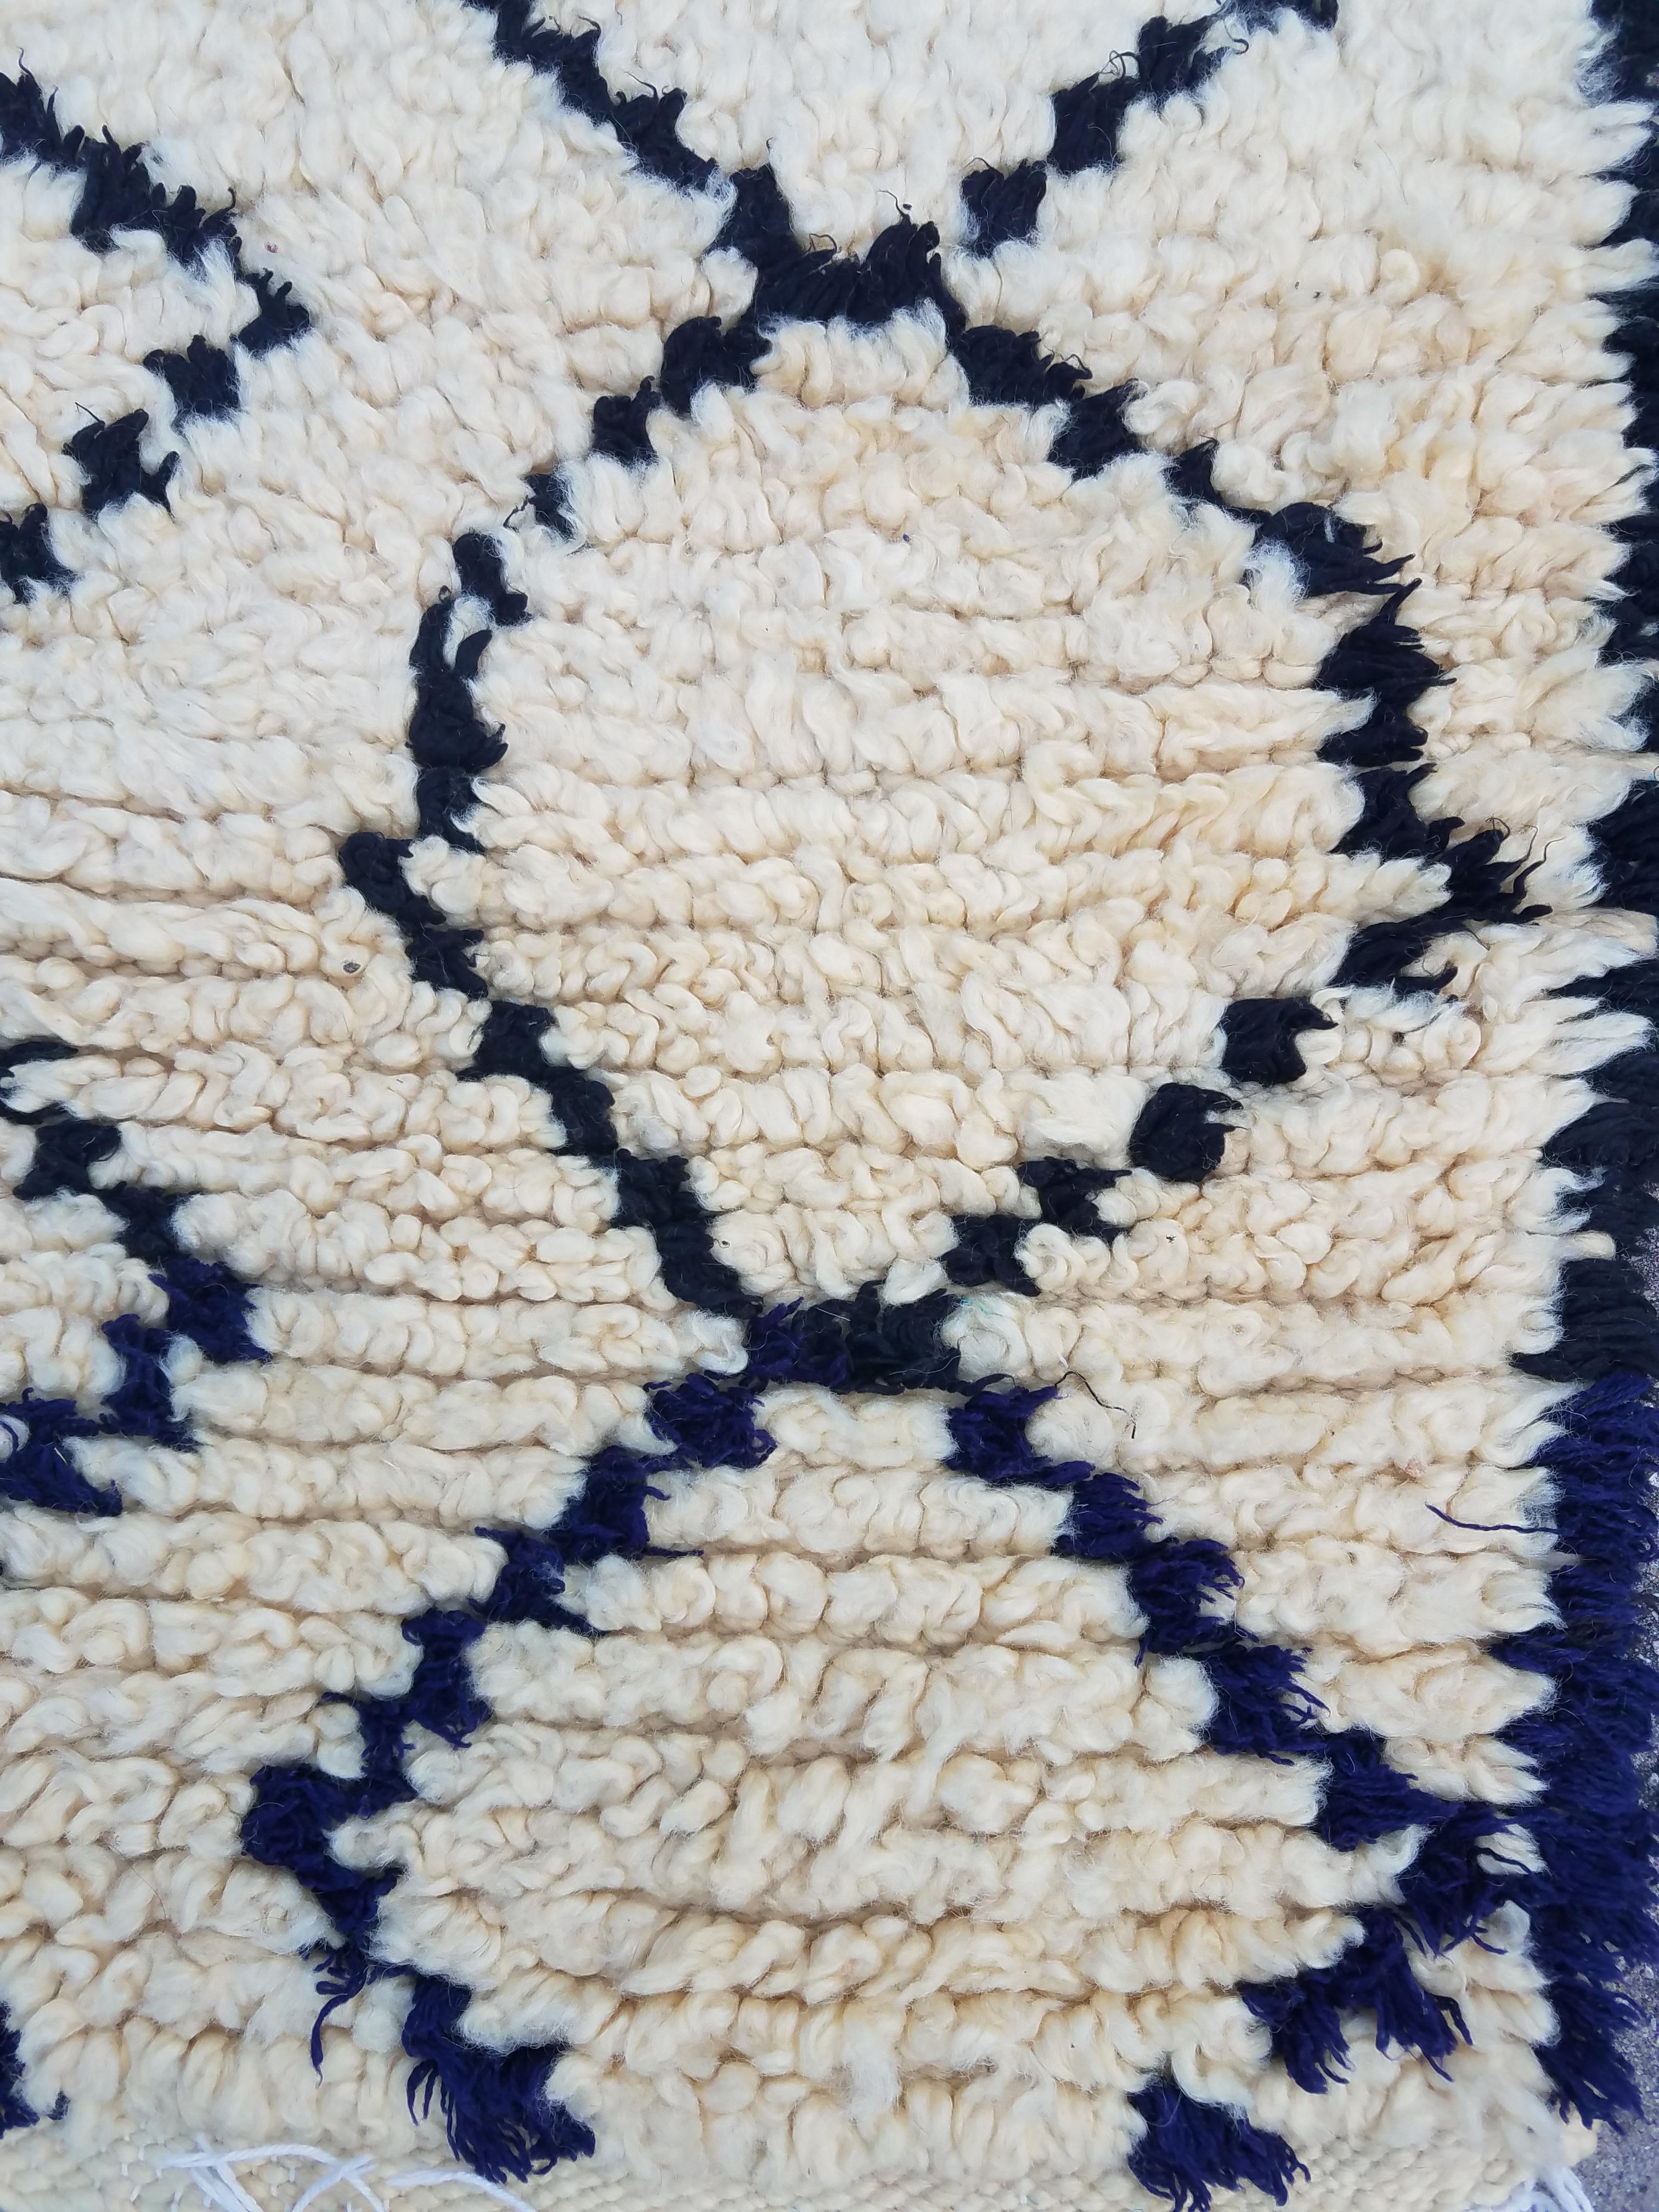 Moroccan black / white (and some blue at one end) Beni Ourain rug. Made of pure wool. Excellent handcraftsmanship. Priced to sell. Measuring approximately 95 cm in length and 32